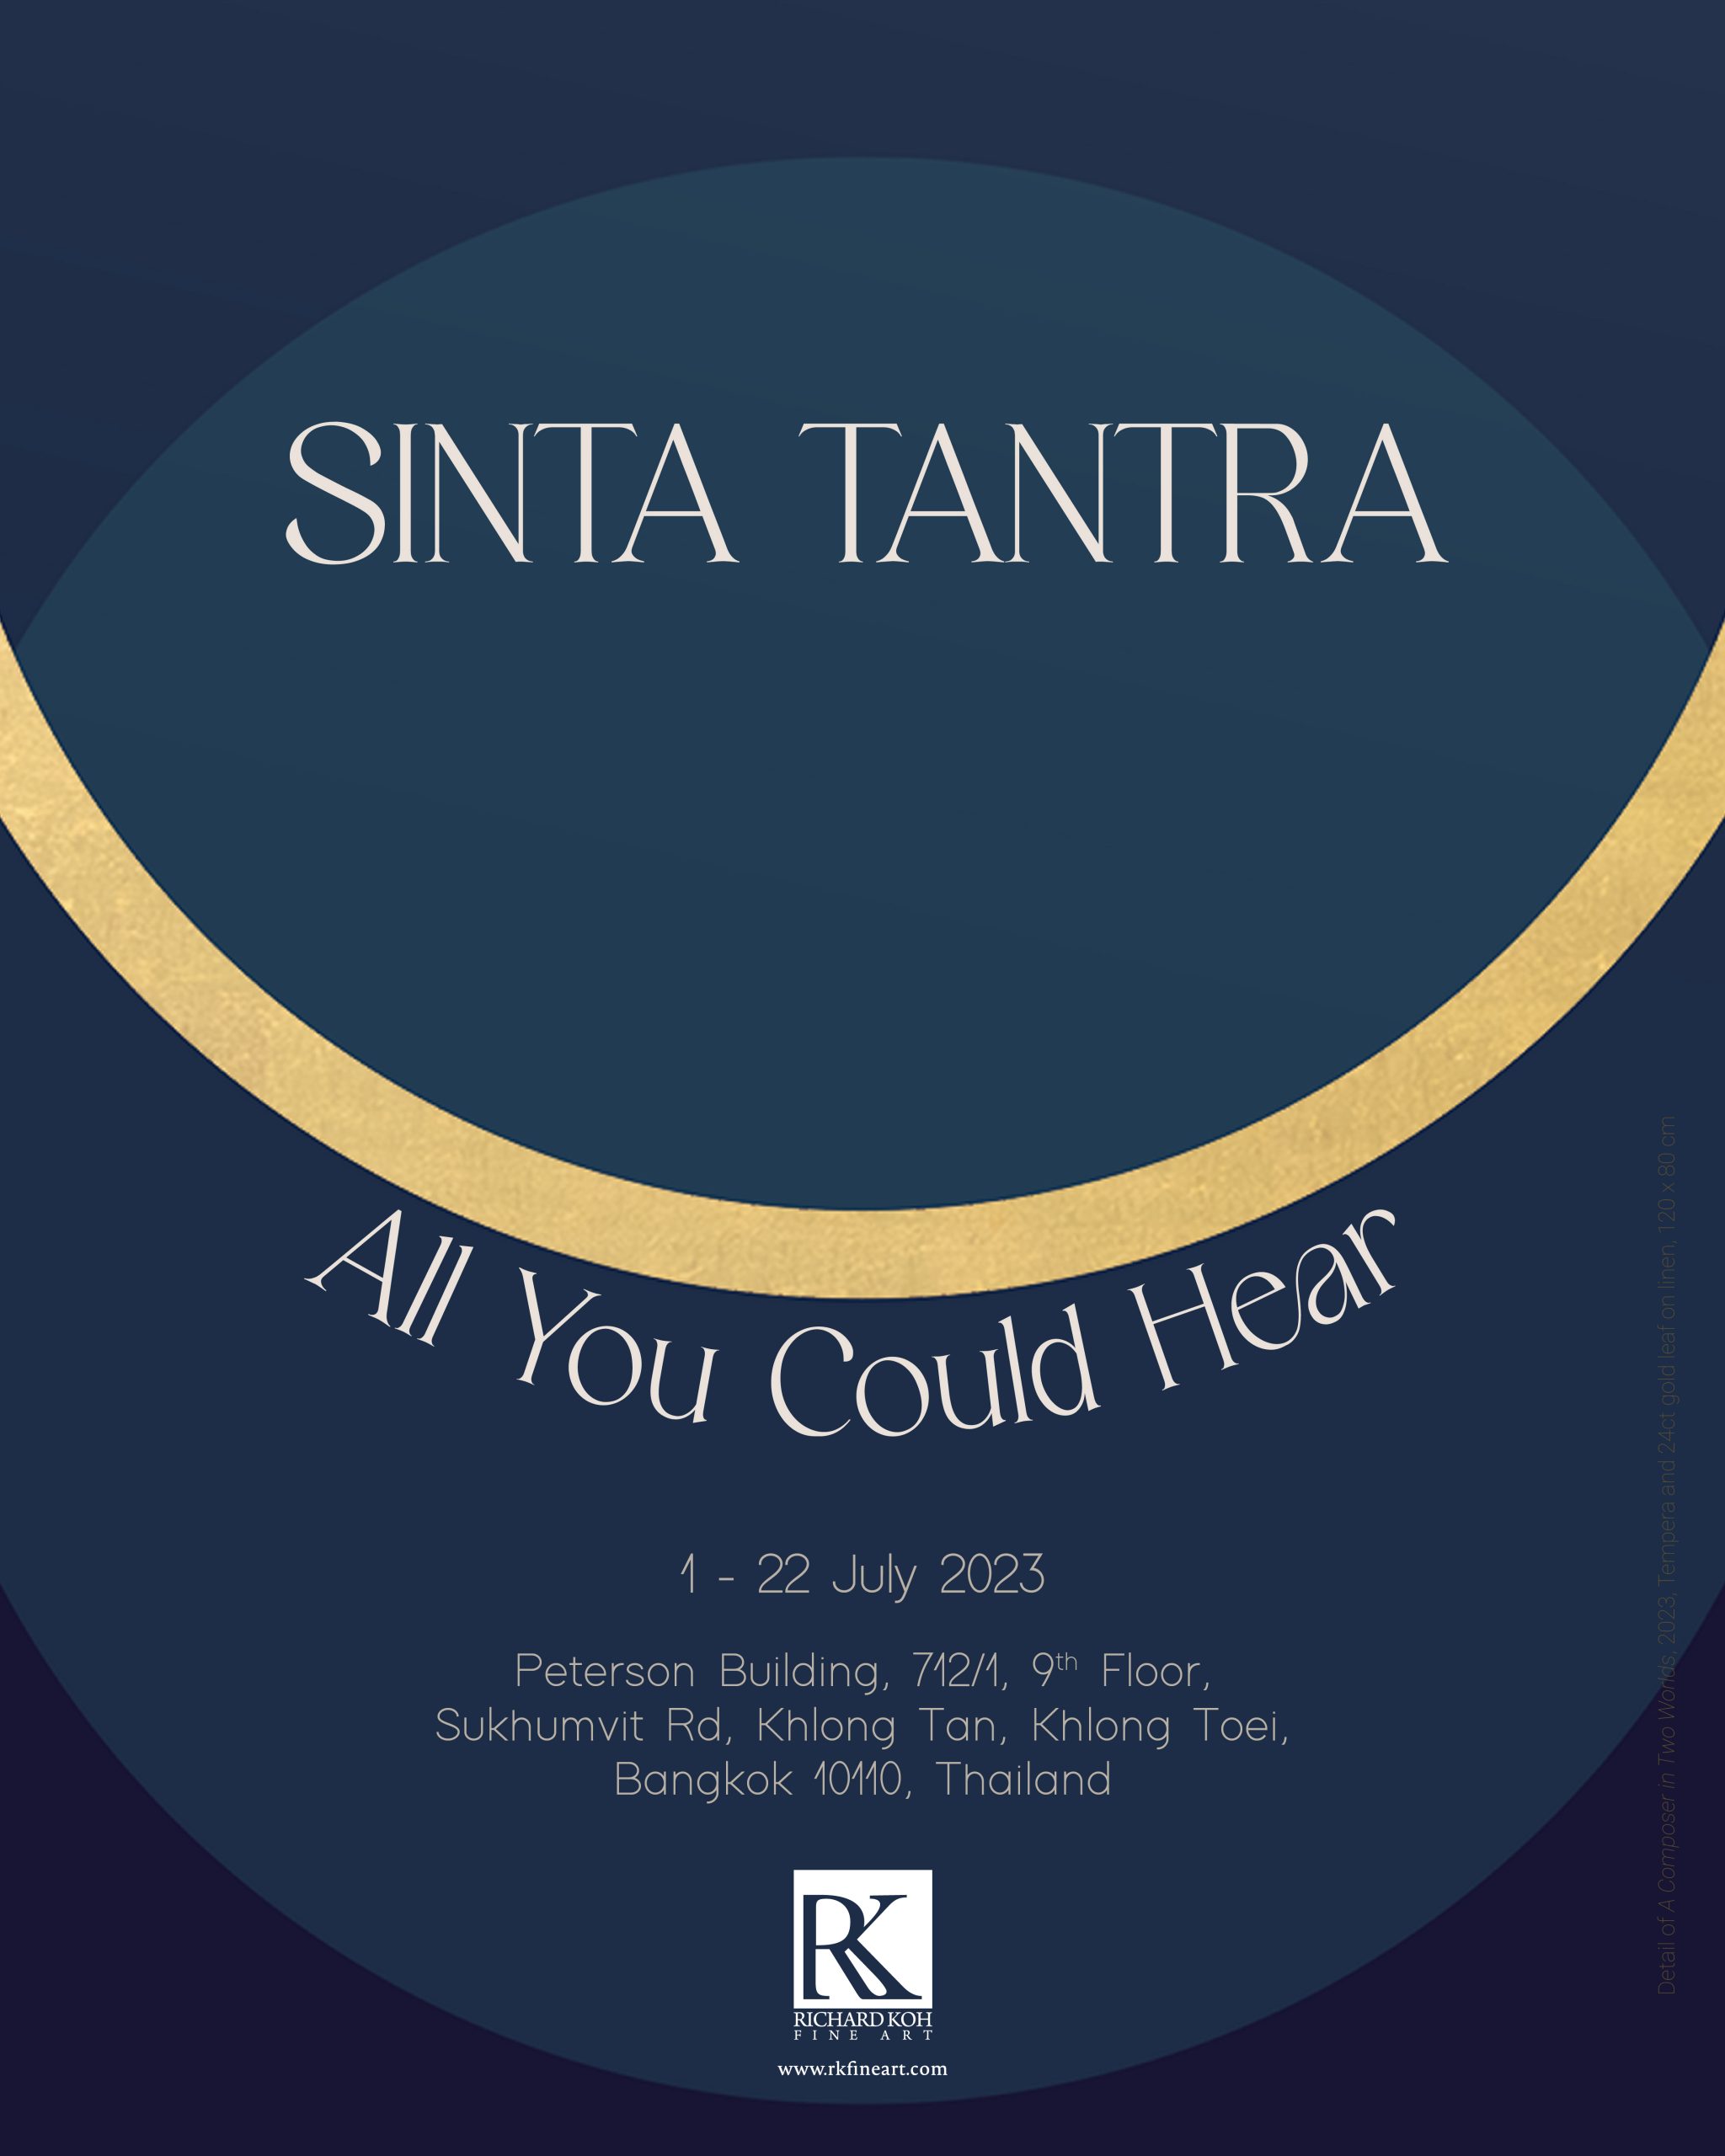   Sinta Tantra – All You Could Hear